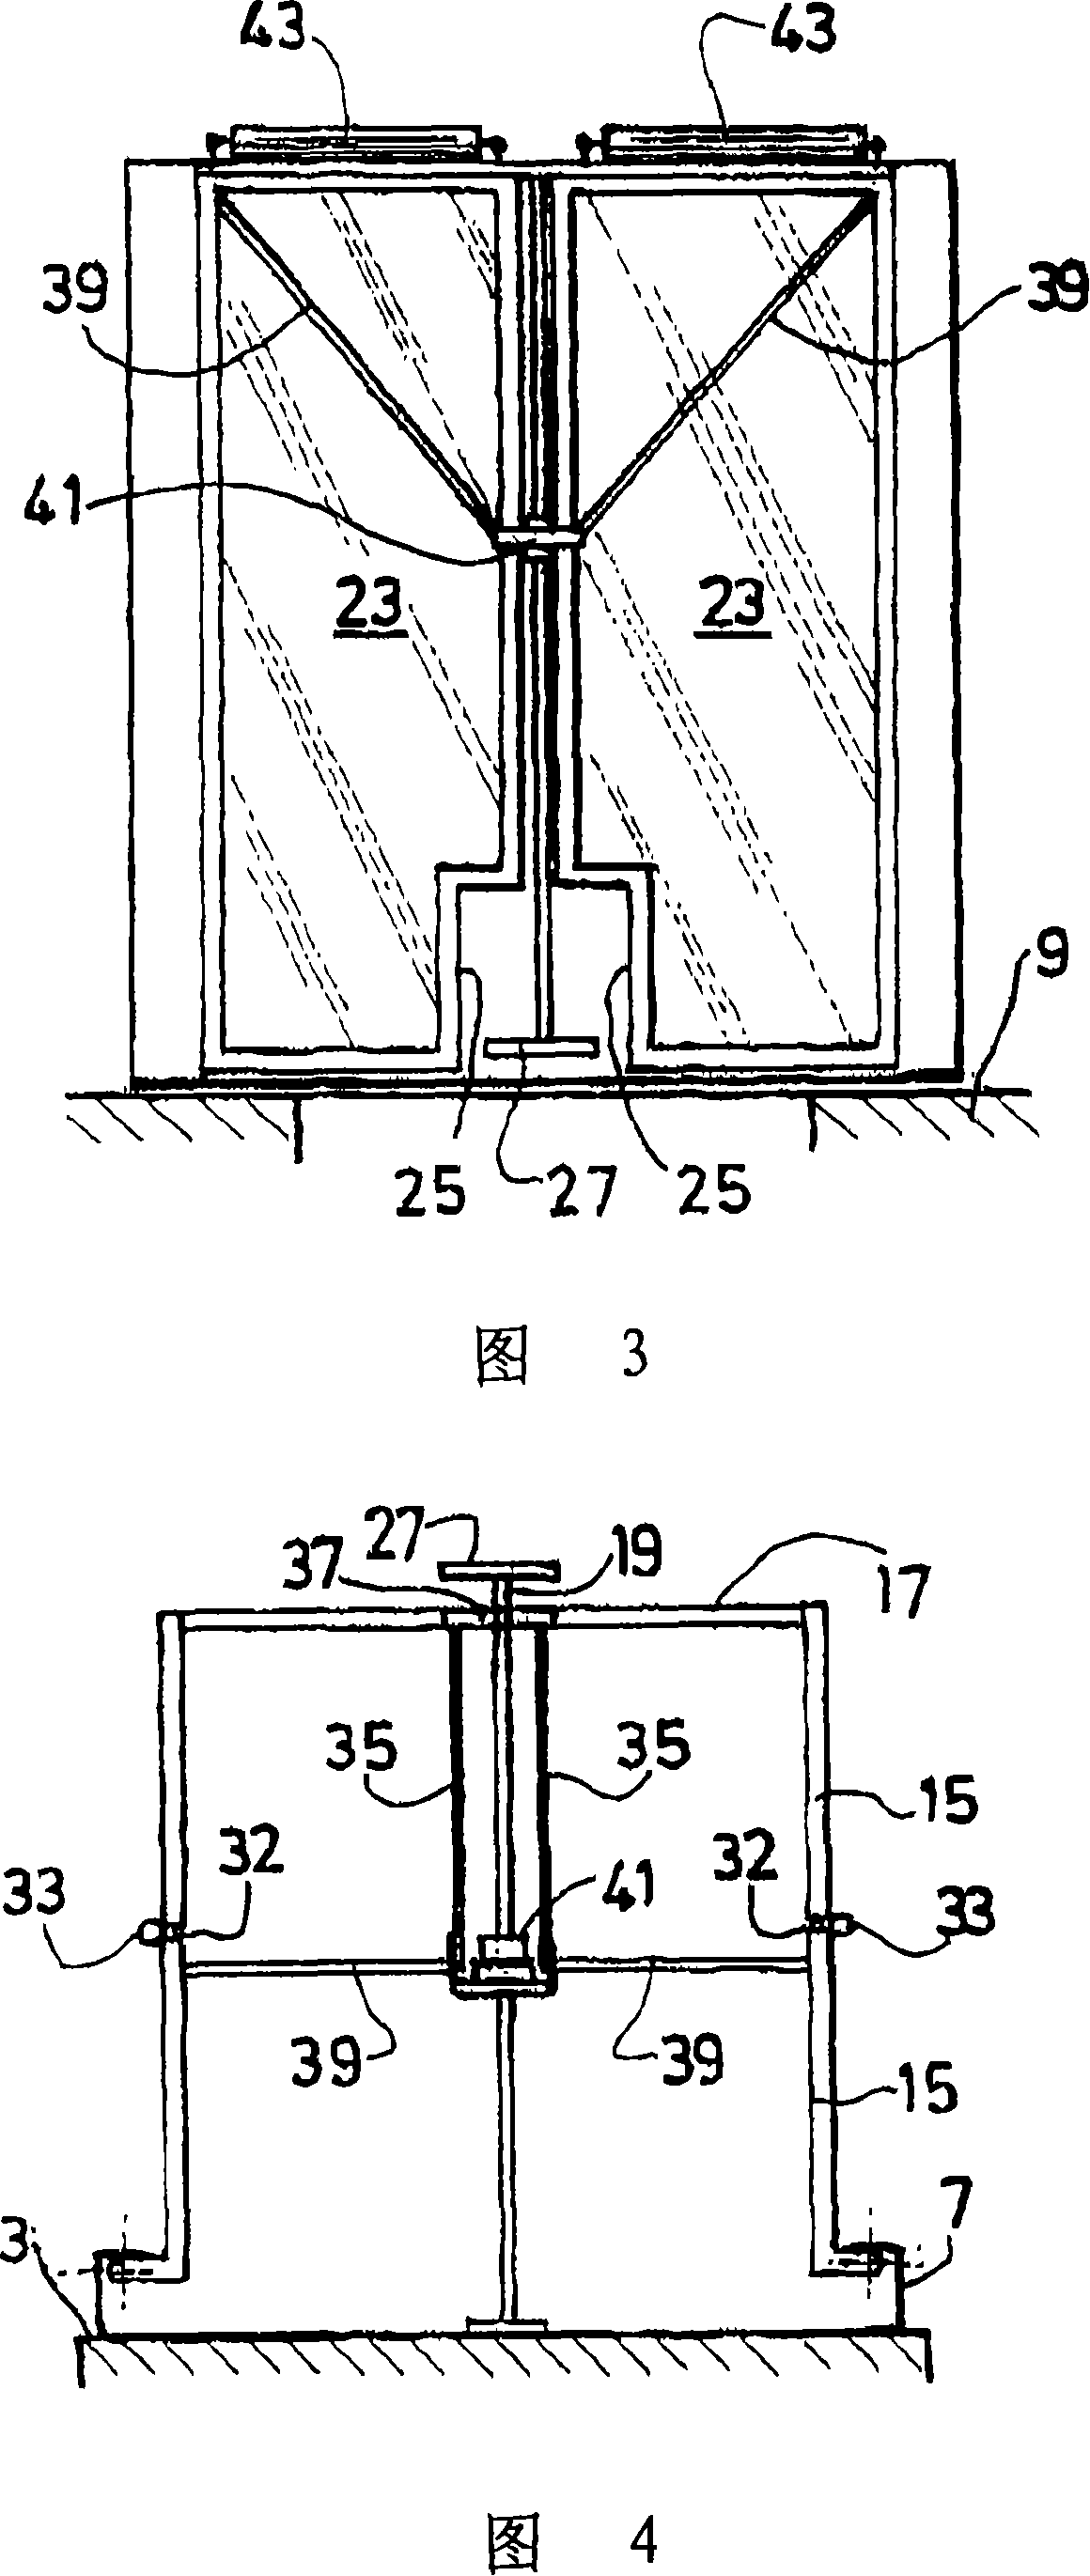 Roof railing for an elevator car adapted to be collapsed with a handle actuating all sides at the same time